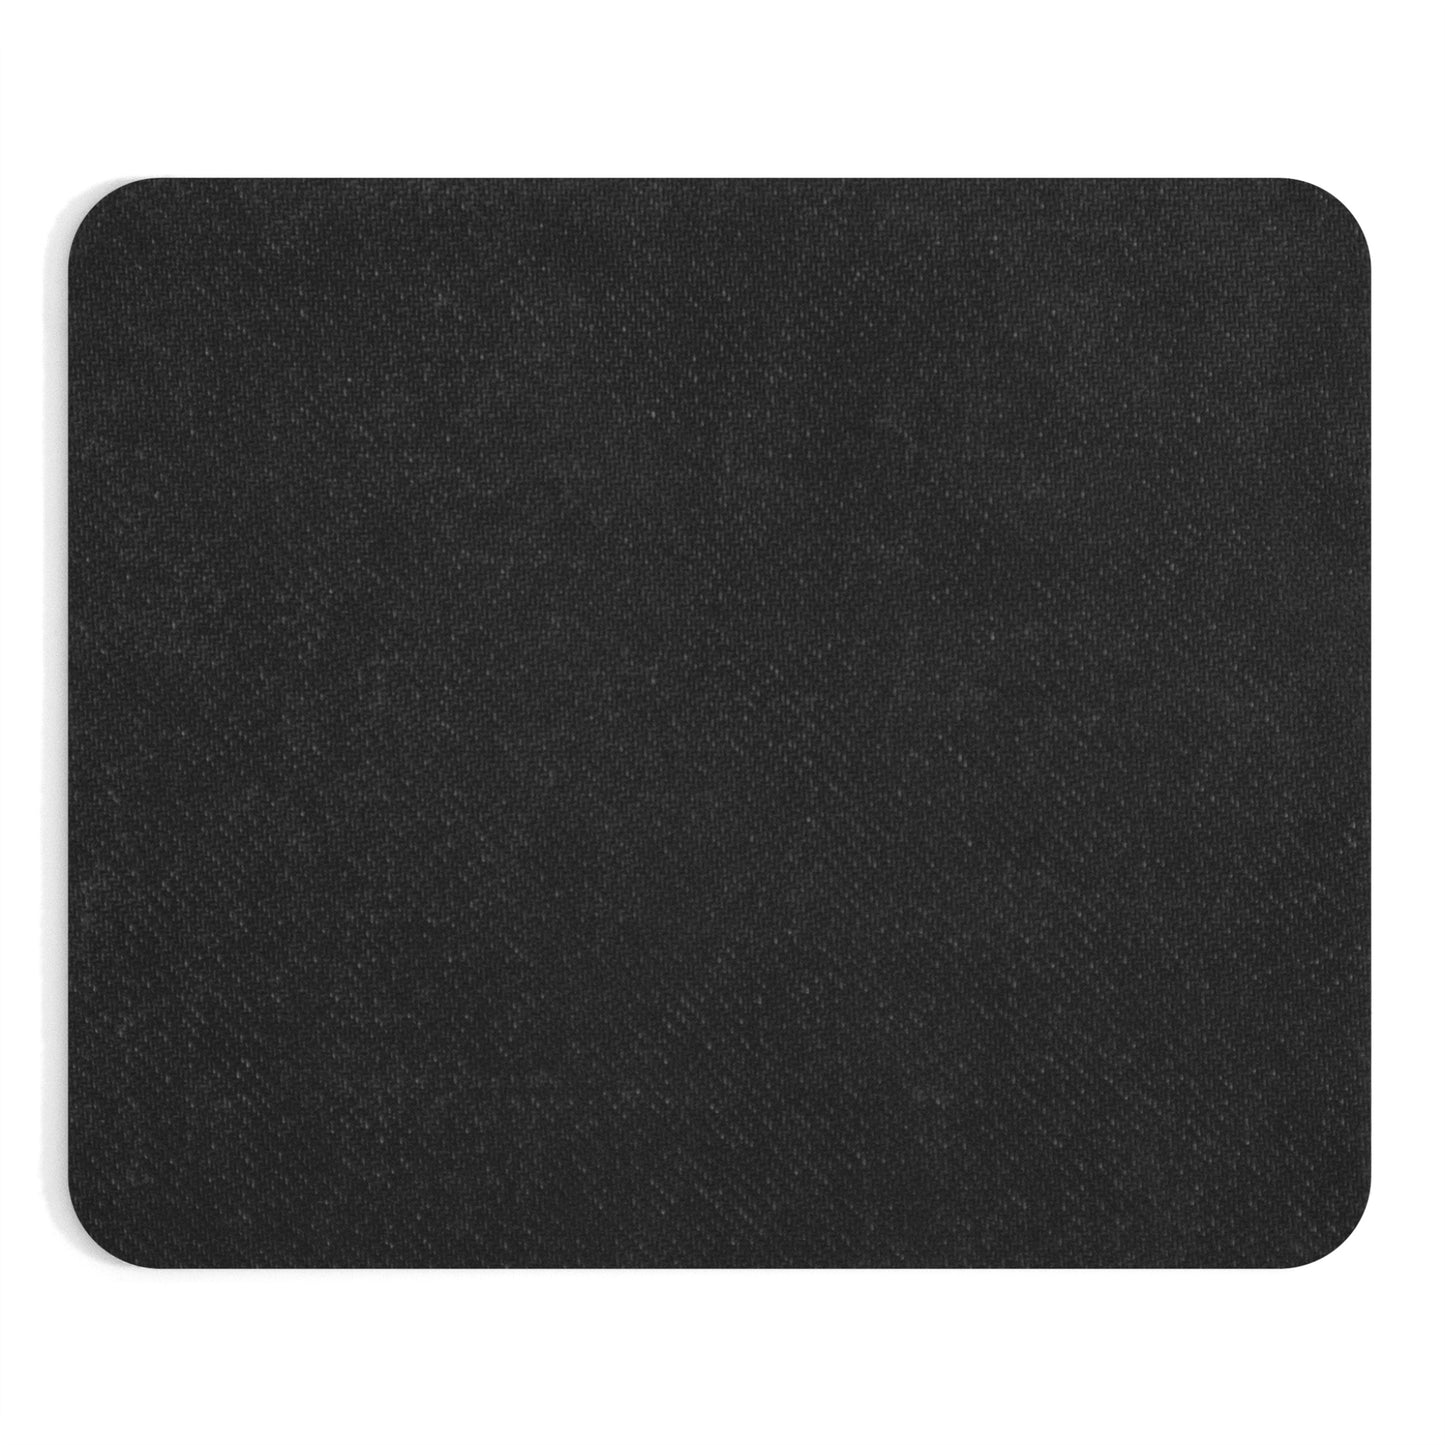 MOUSE PAD - A MOMENT OF SILENCE